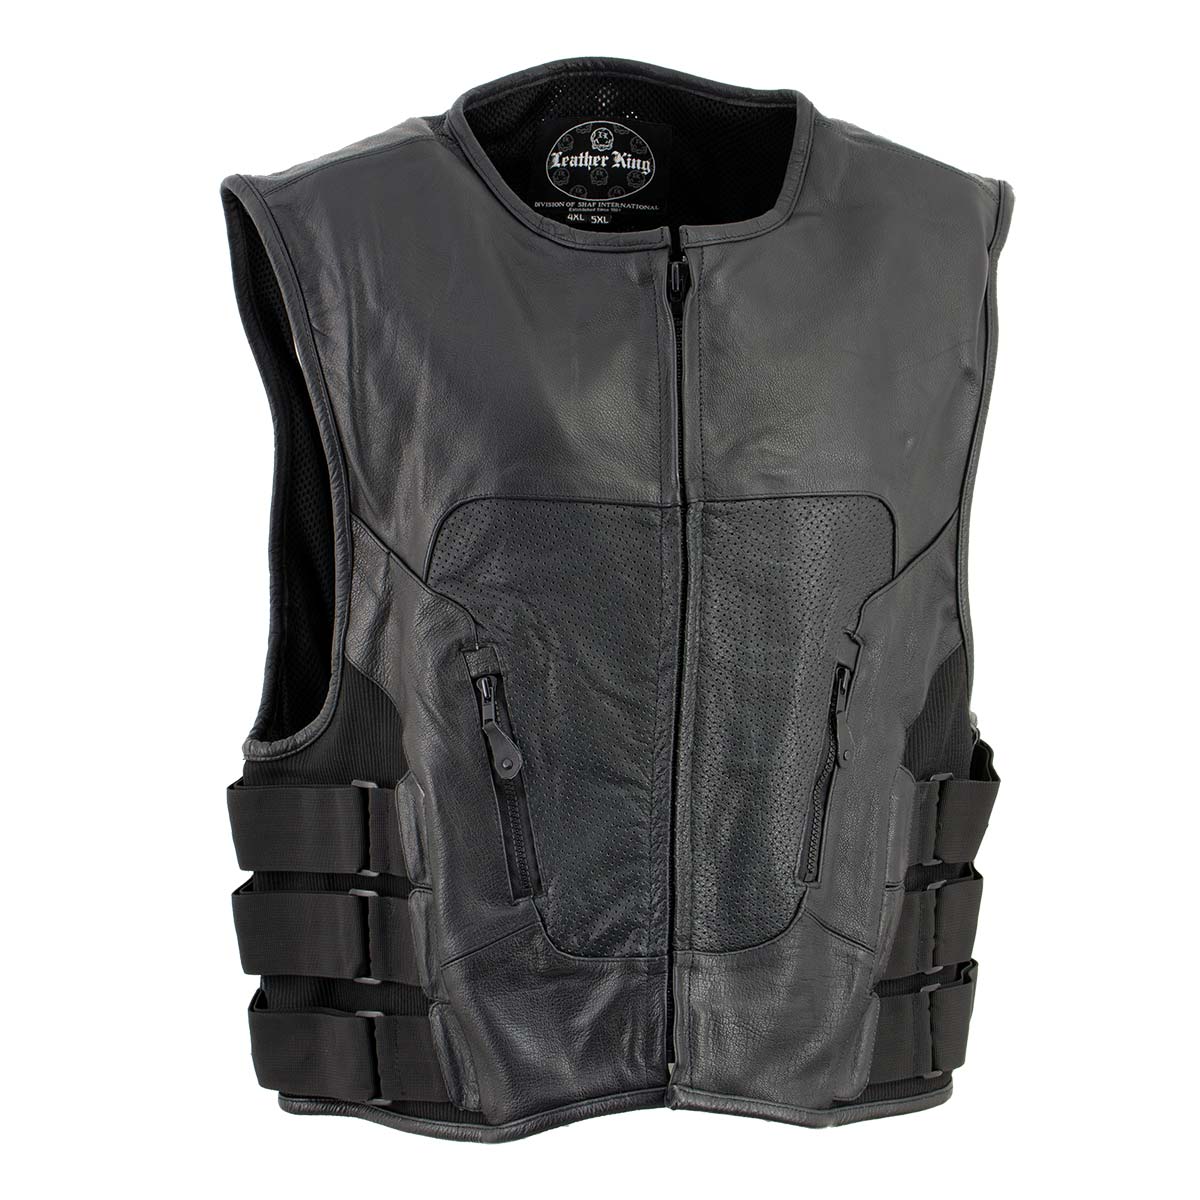 Milwaukee Leather SH1467 Men's Classic Black Leather Vest with Back Padding